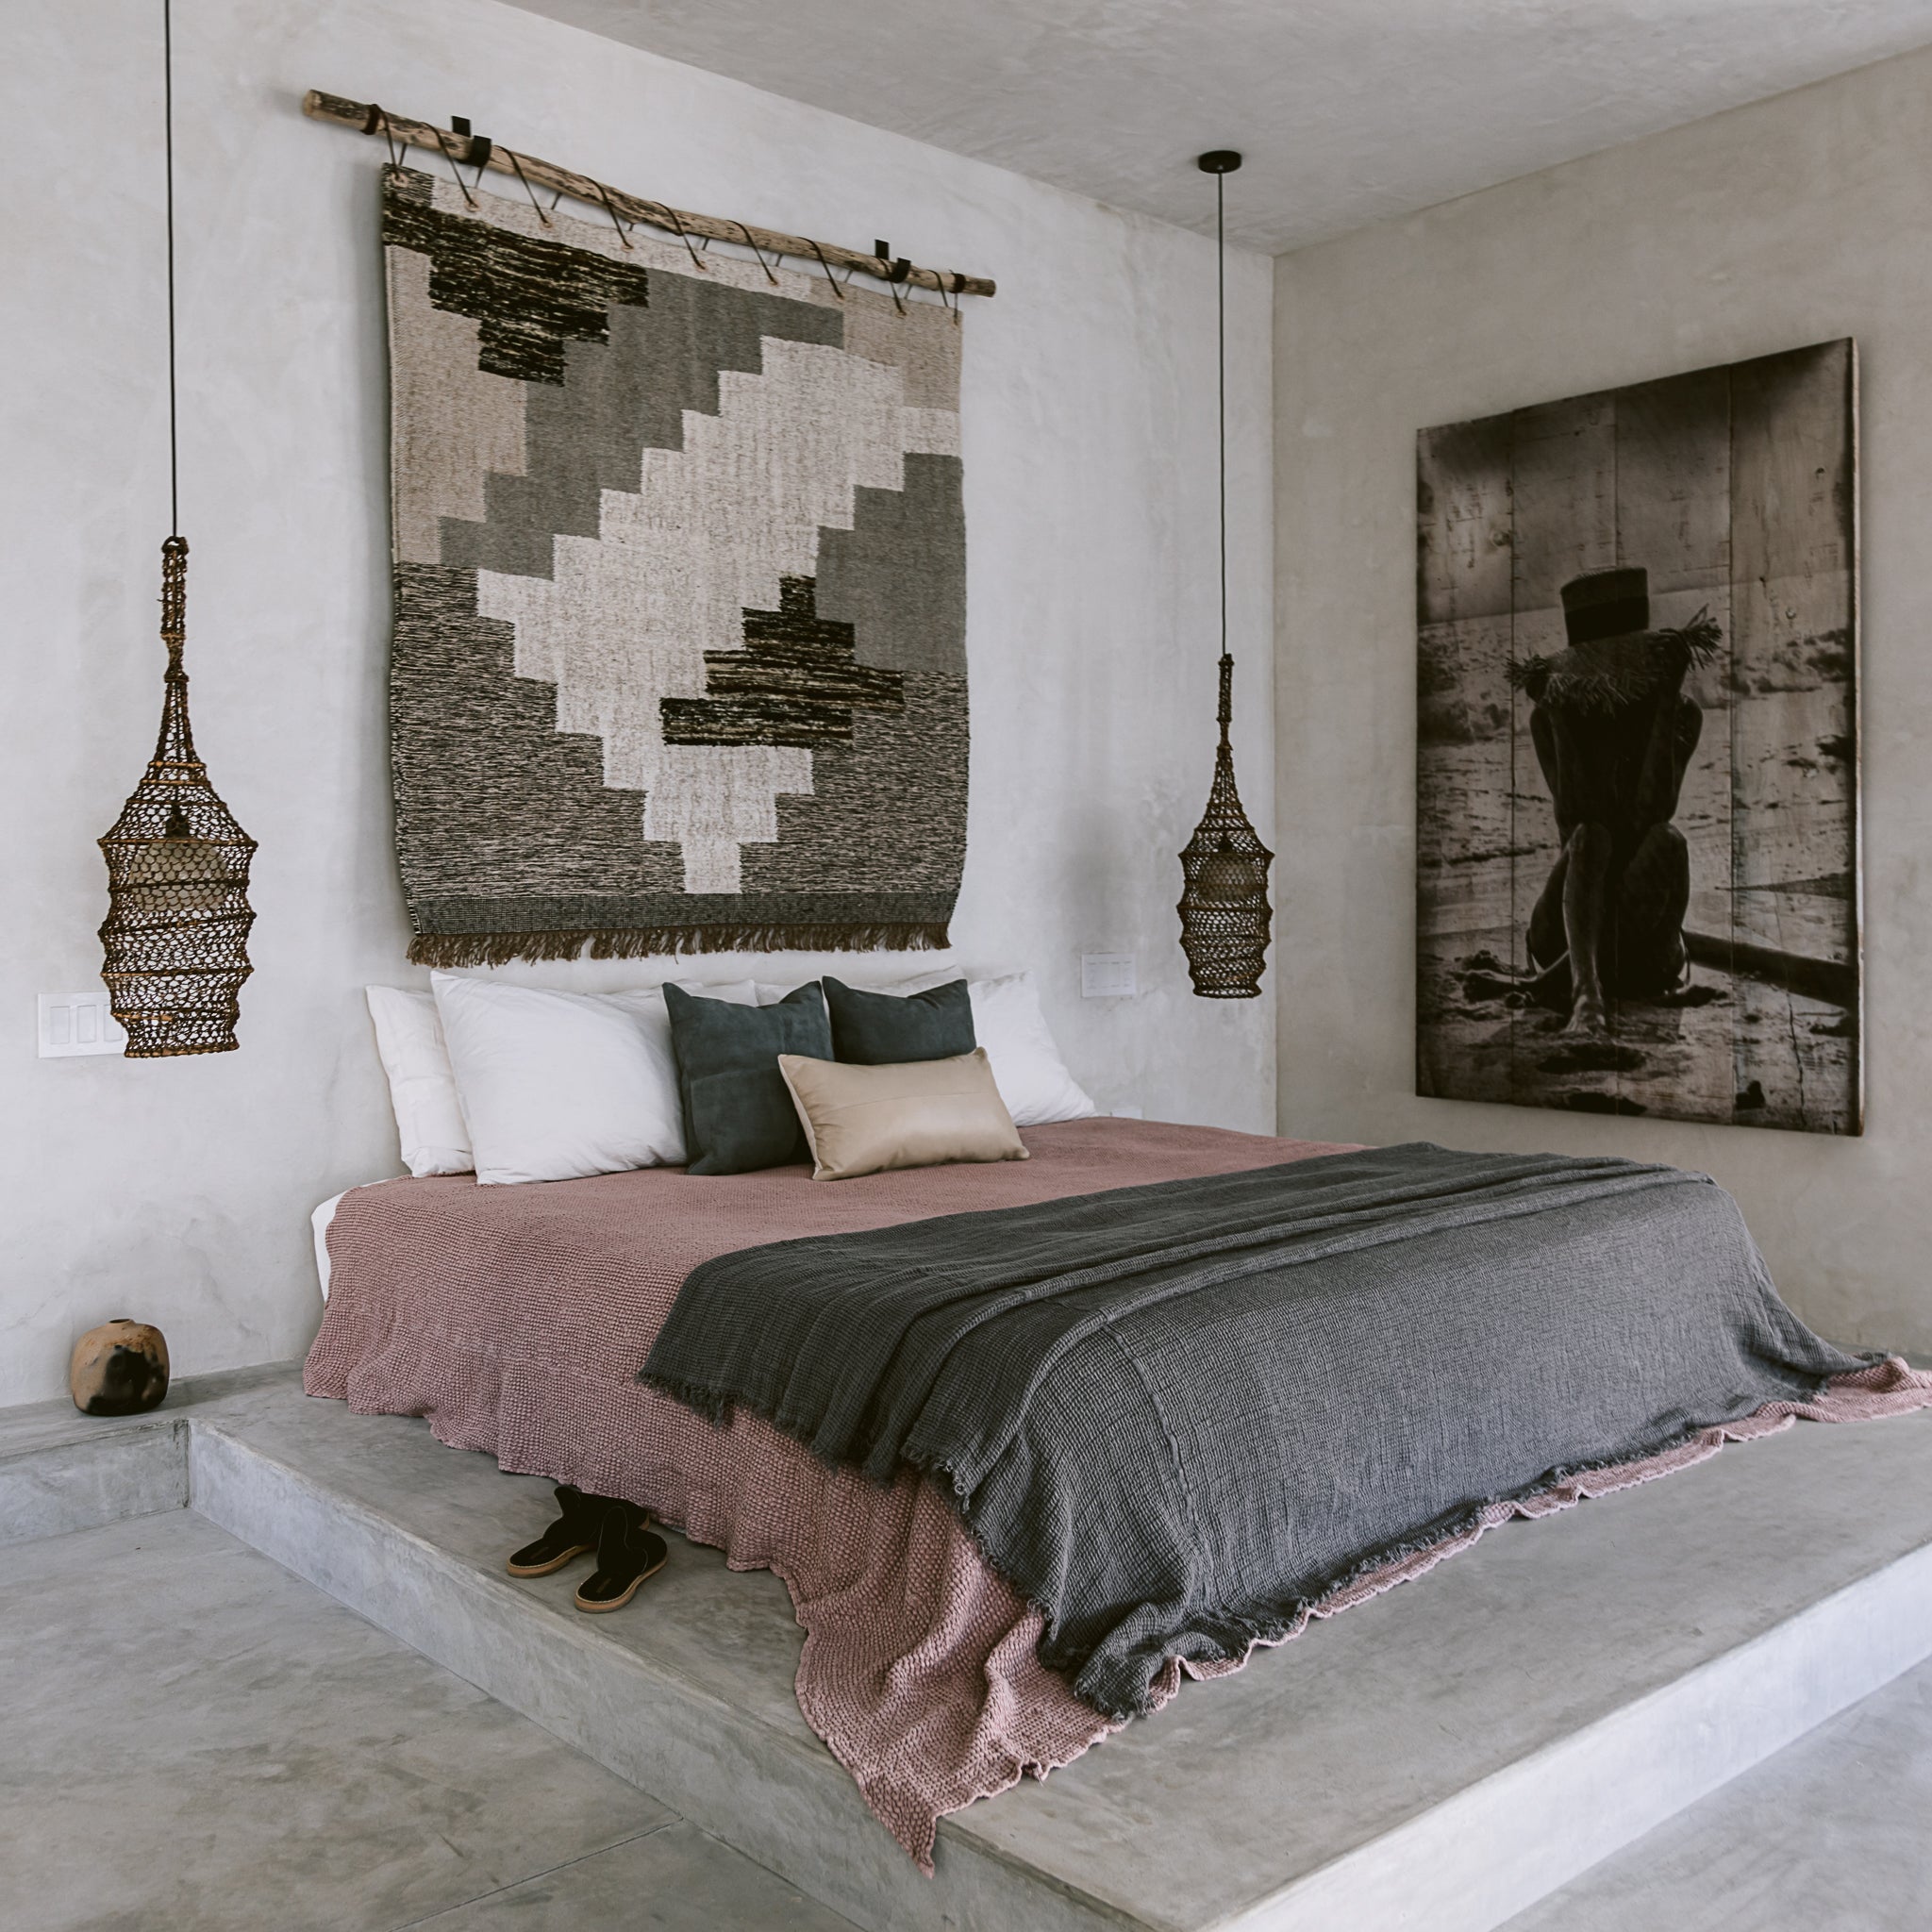 A bedroom scene in a modern beachhouse includes a concrete platform bed, plush bedding, leather throw pillows, a decorative wall-hanging rug and a large portrait of a woman. 